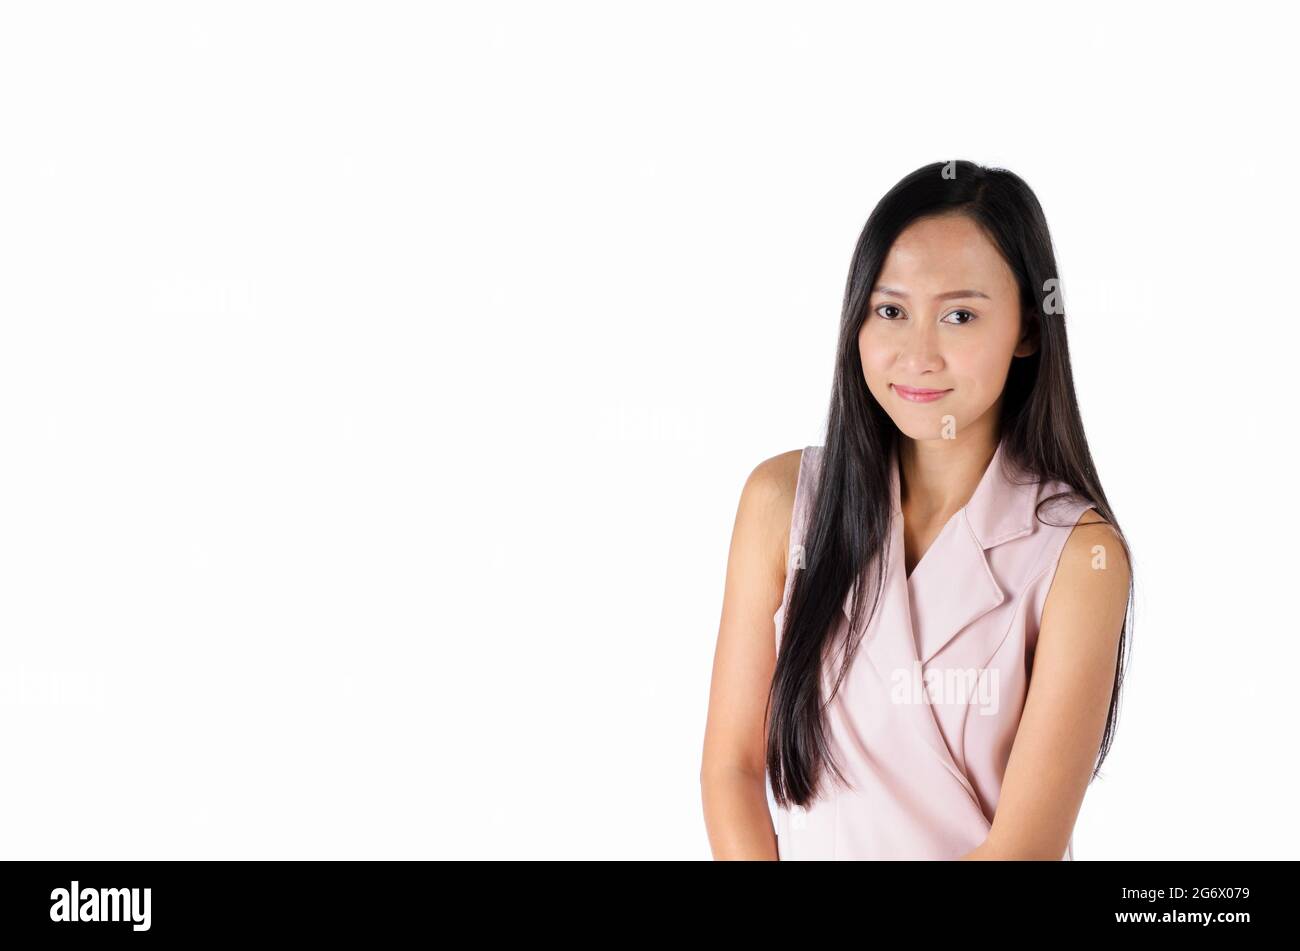 Portrait photo of asian woman with happy expression face and smile isolated on white background with space for text. Stock Photo